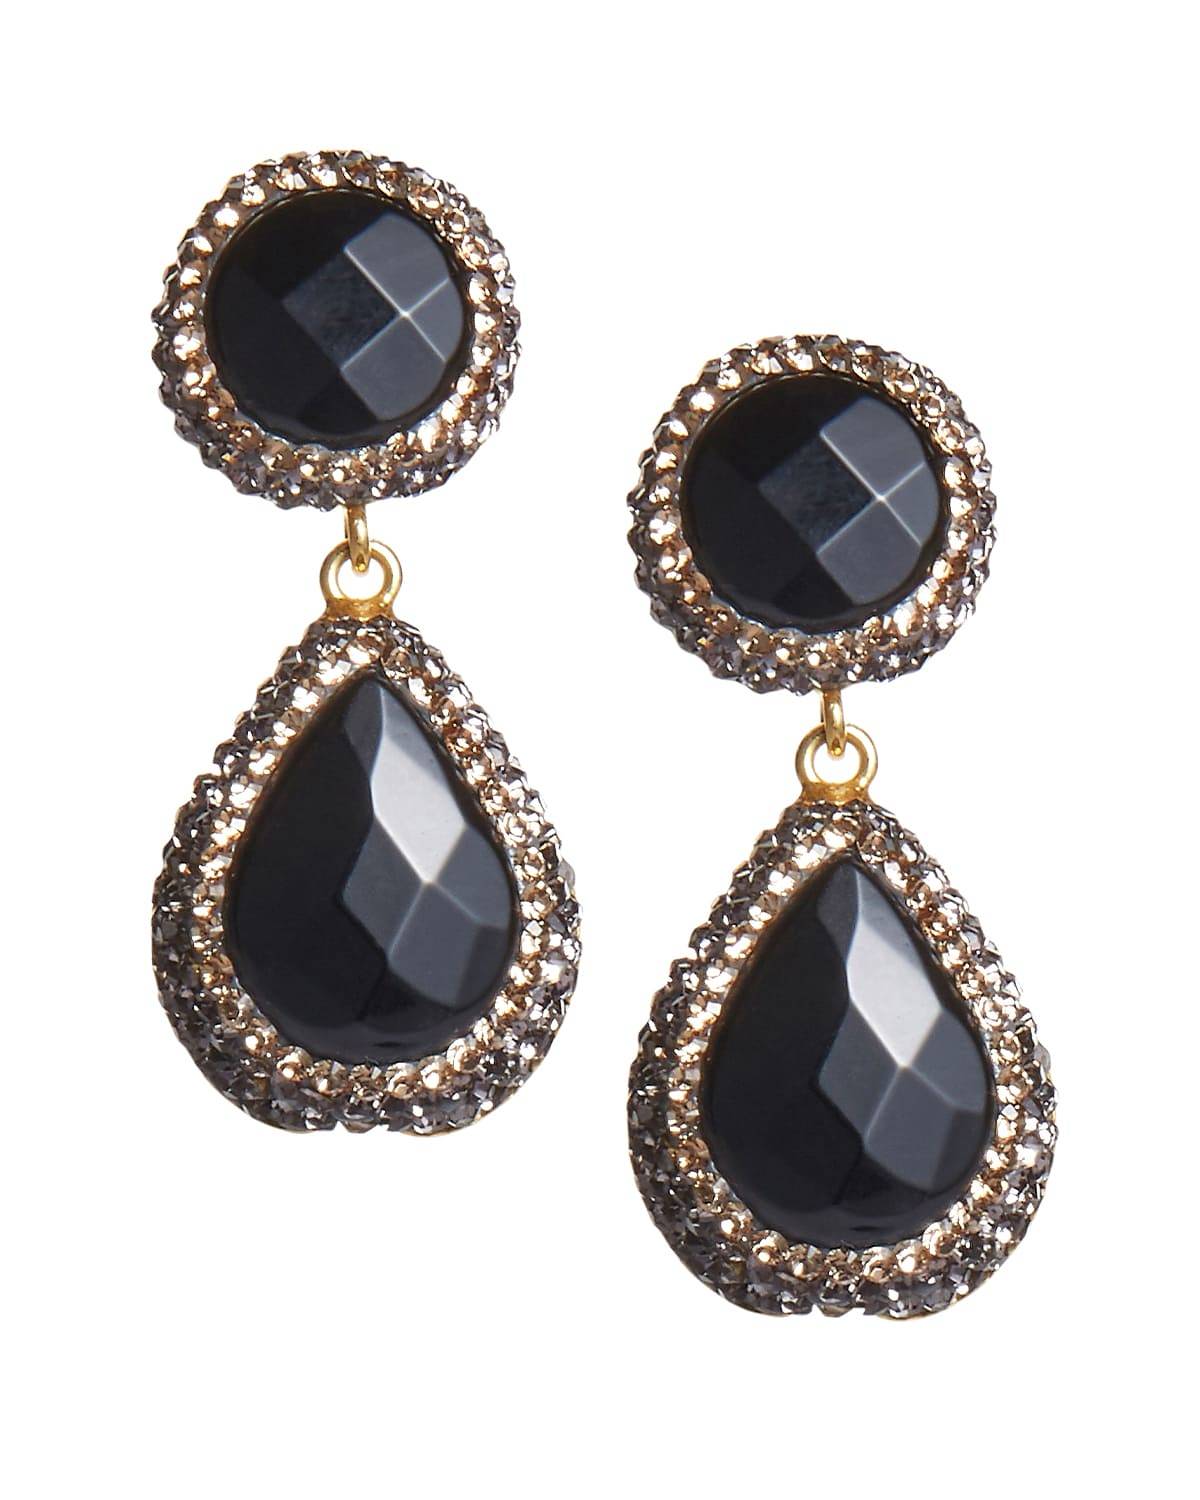 Soru Jewellery 18ct gold plated solid silver, black onyx gemstones set within sparkling crystals